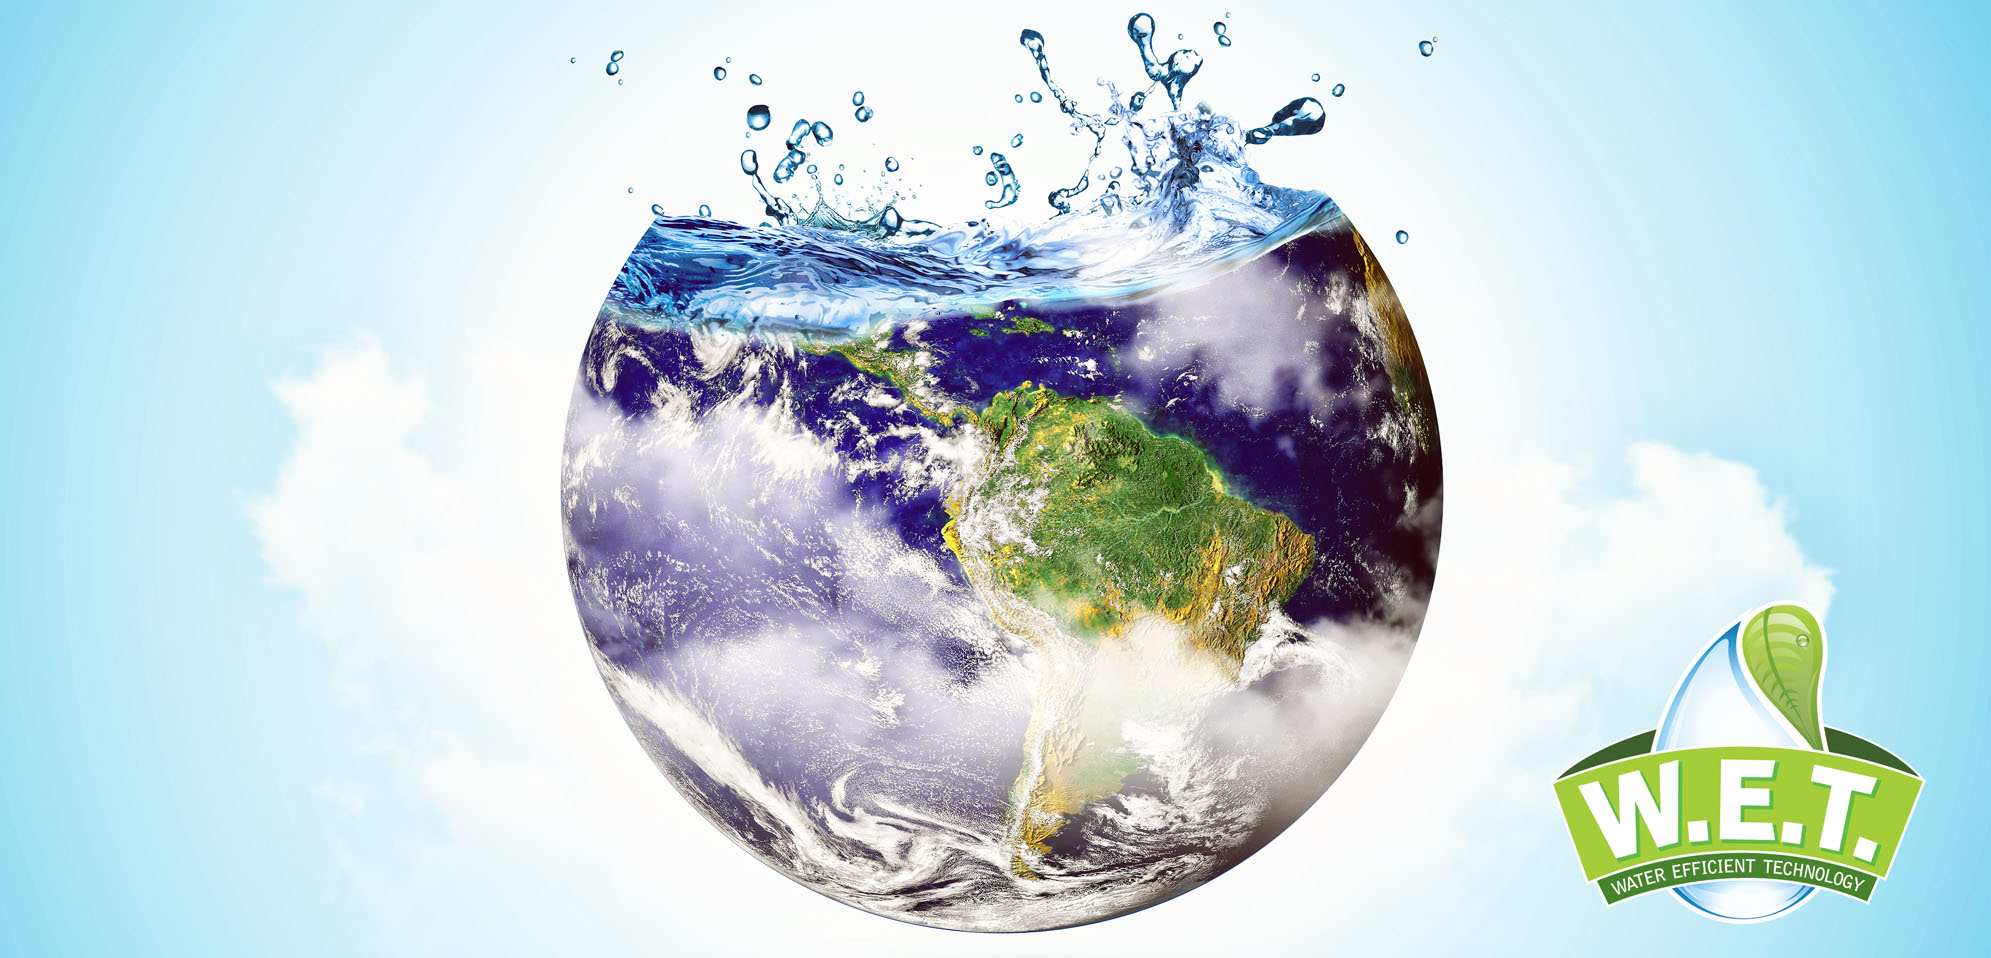 Earth Day 2016: New smart technology reduces water and salt use in water softening process